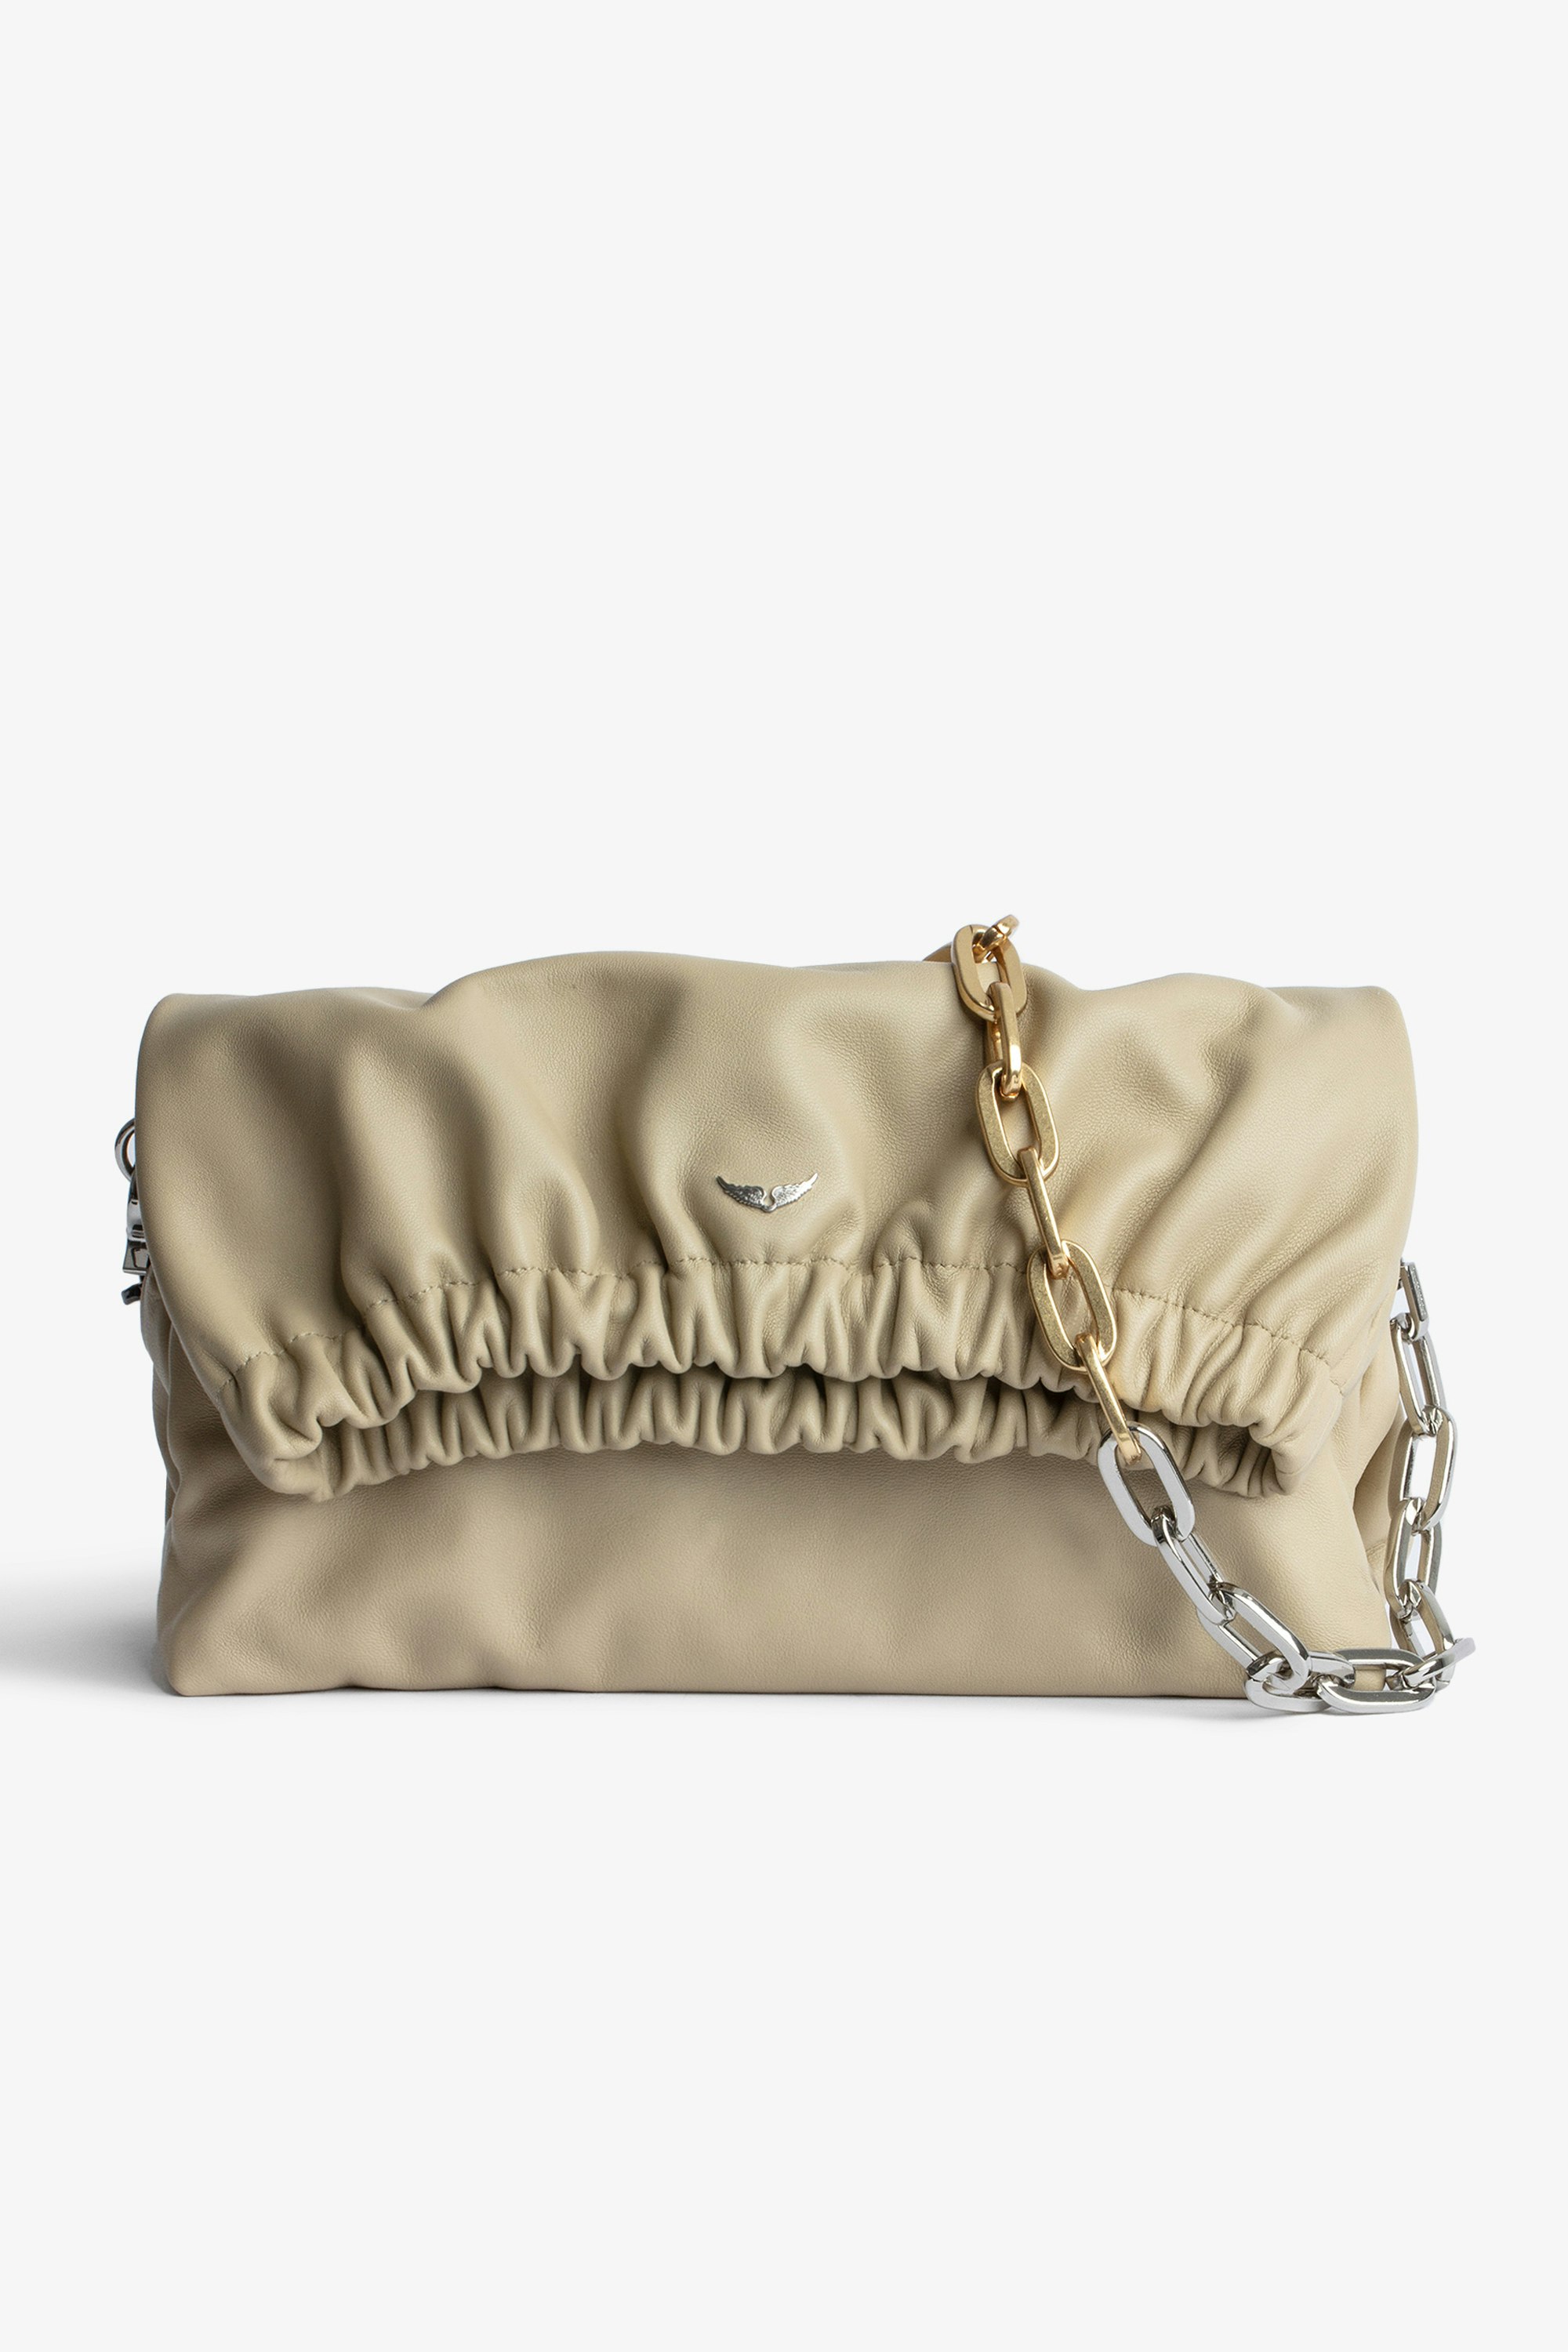 Rockyssime バッグ Women’s clutch bag in beige smooth leather with two-tone metal chain